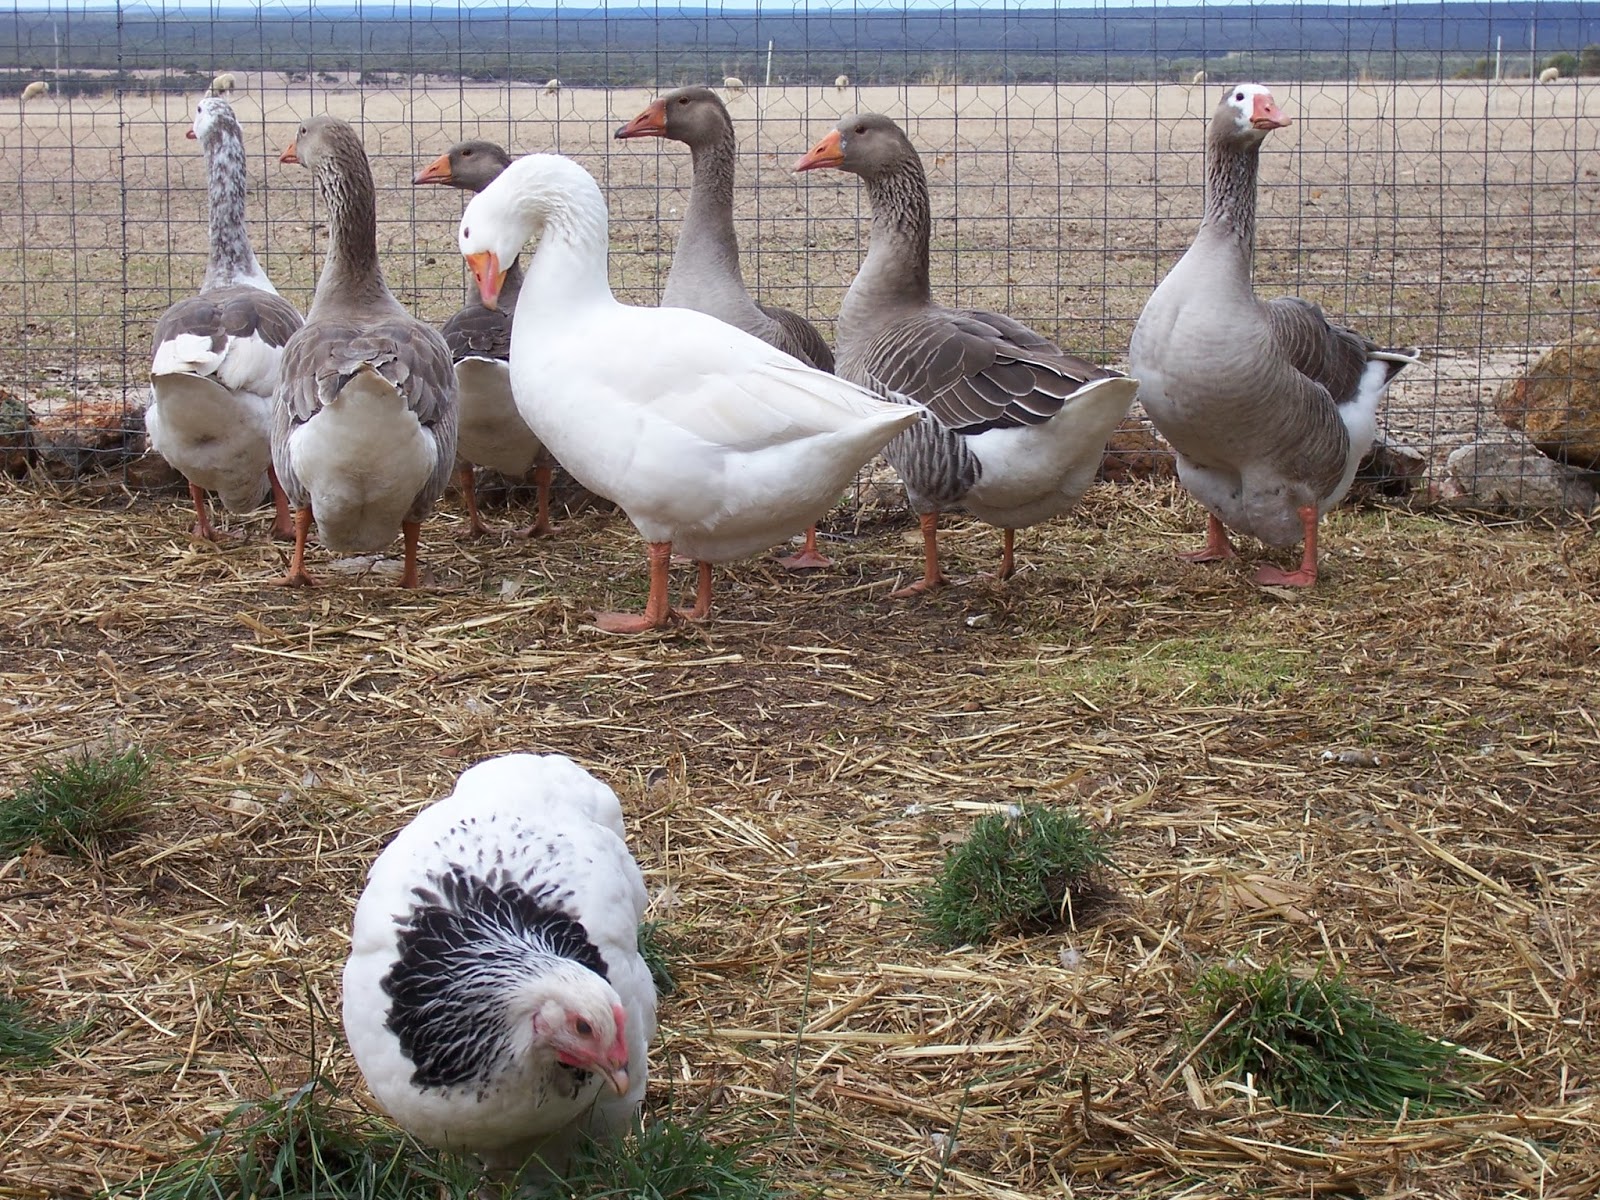 Pretending to Farm: What's Good for the Goose